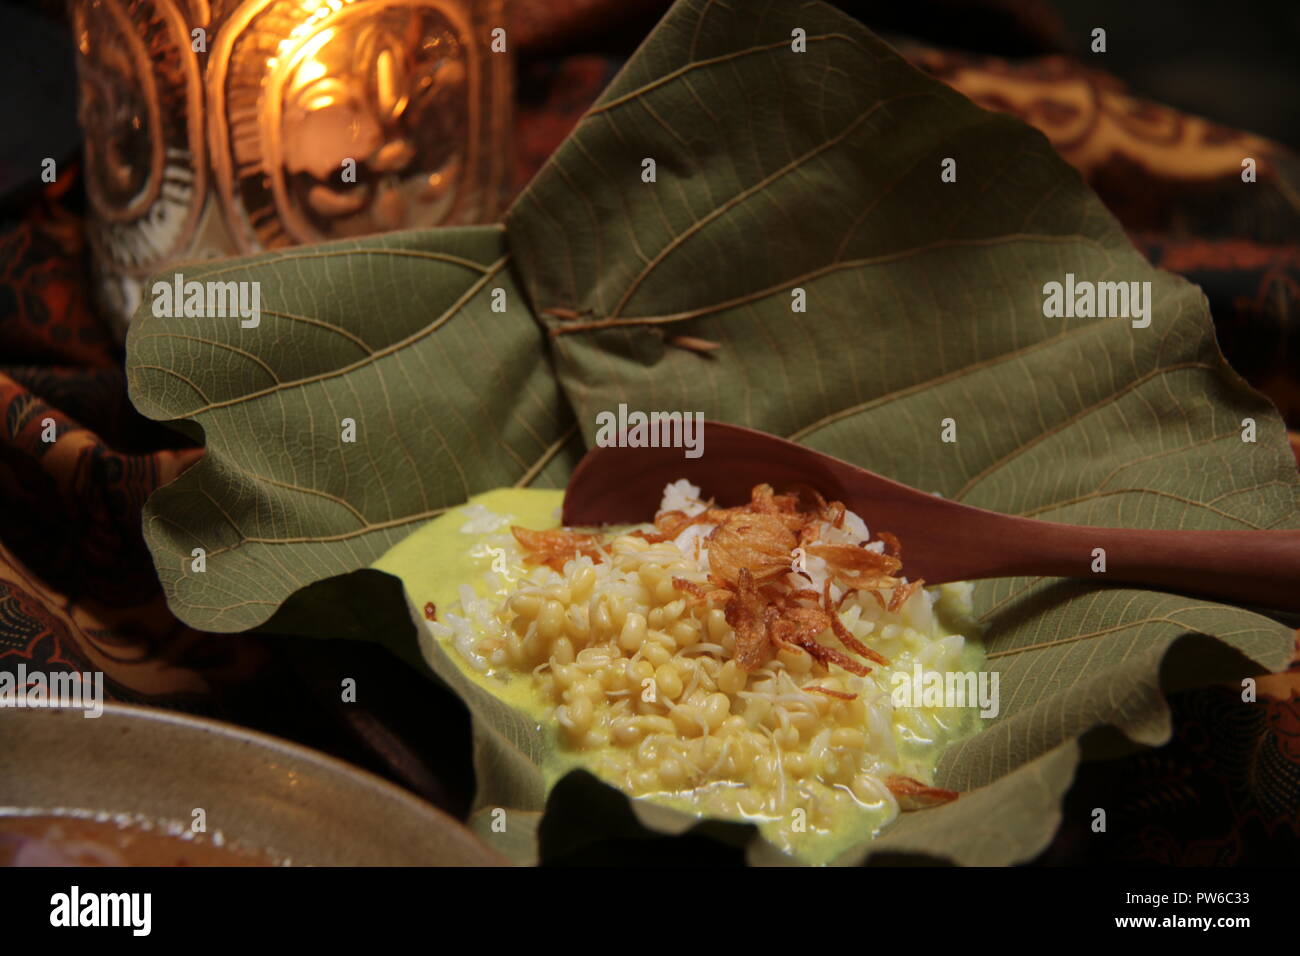 Nasi Opor or Nasi Gulai, the rice in yellow curry soup, the popular staple food for Sate Blora. Served in authentic way, in bowl made of teak leaf. Stock Photo